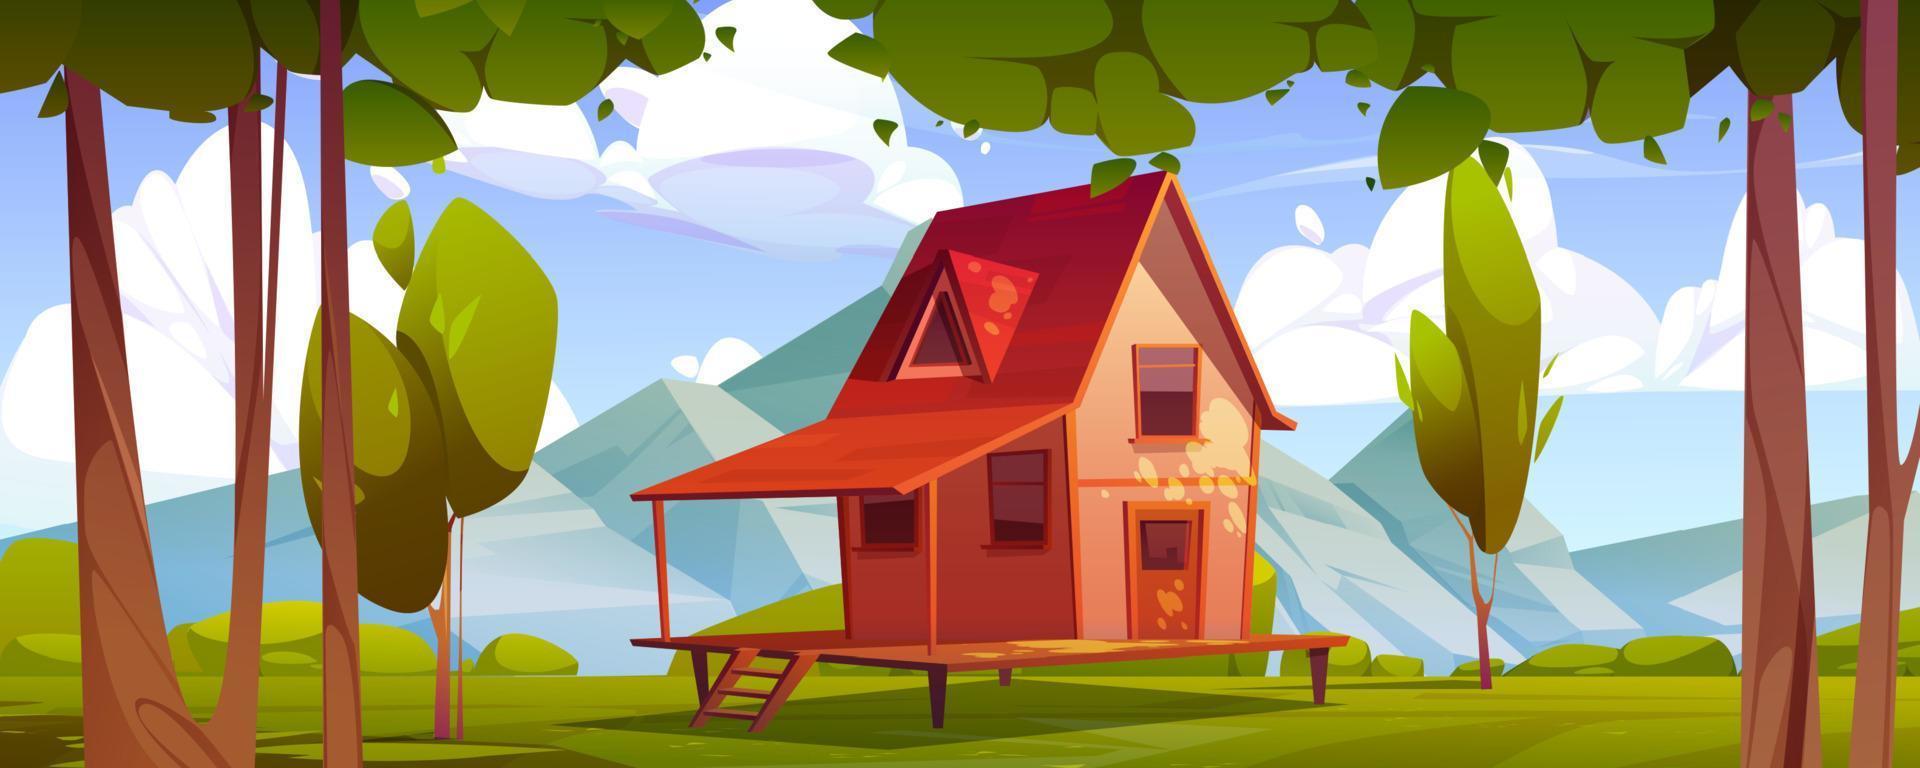 Cottage on field at mountain valley landscape vector